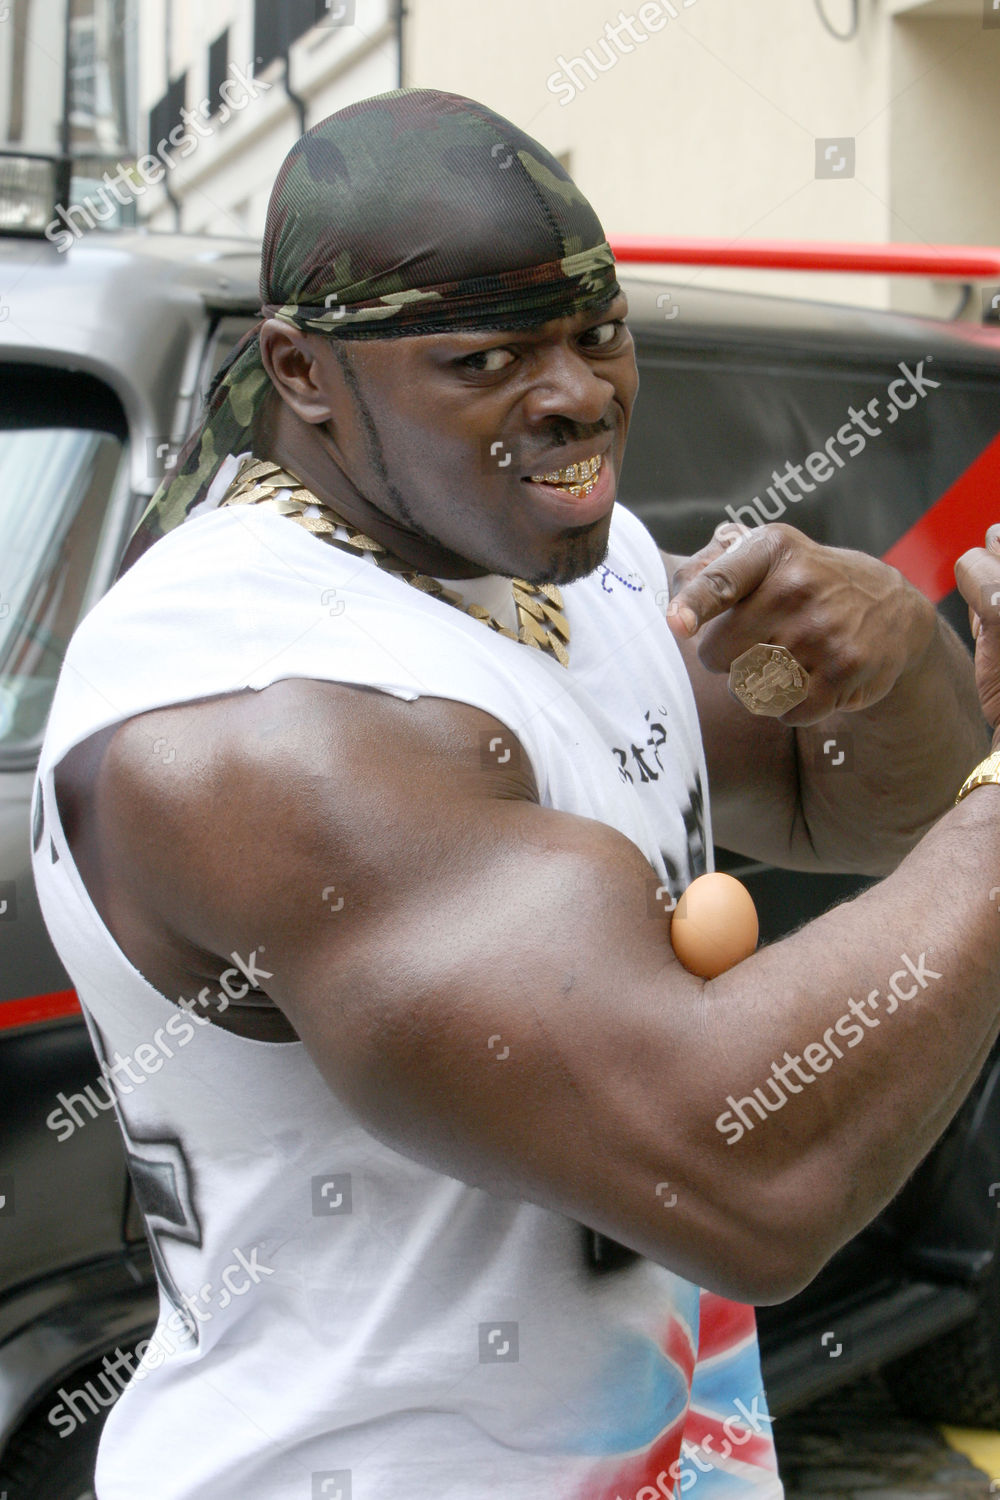 tiny iron has BRITAINS BIGGEST BICEPS attends the launch of